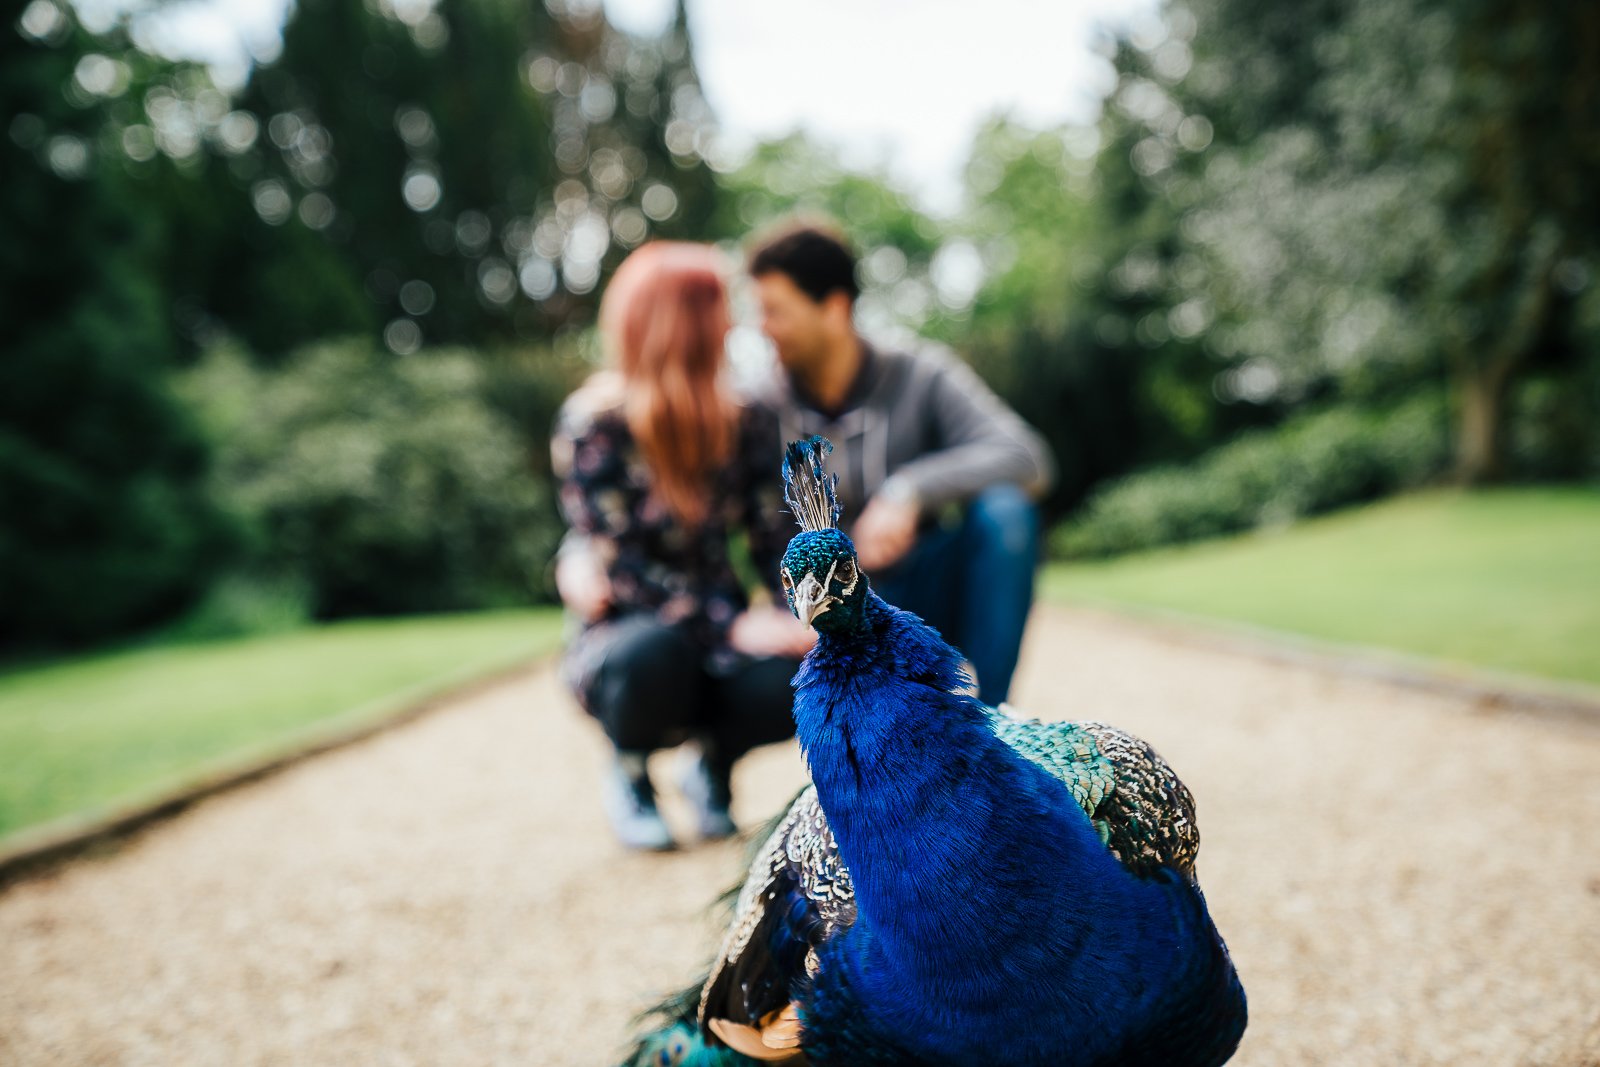 Peacock photobombing engagement shoot with couple in background